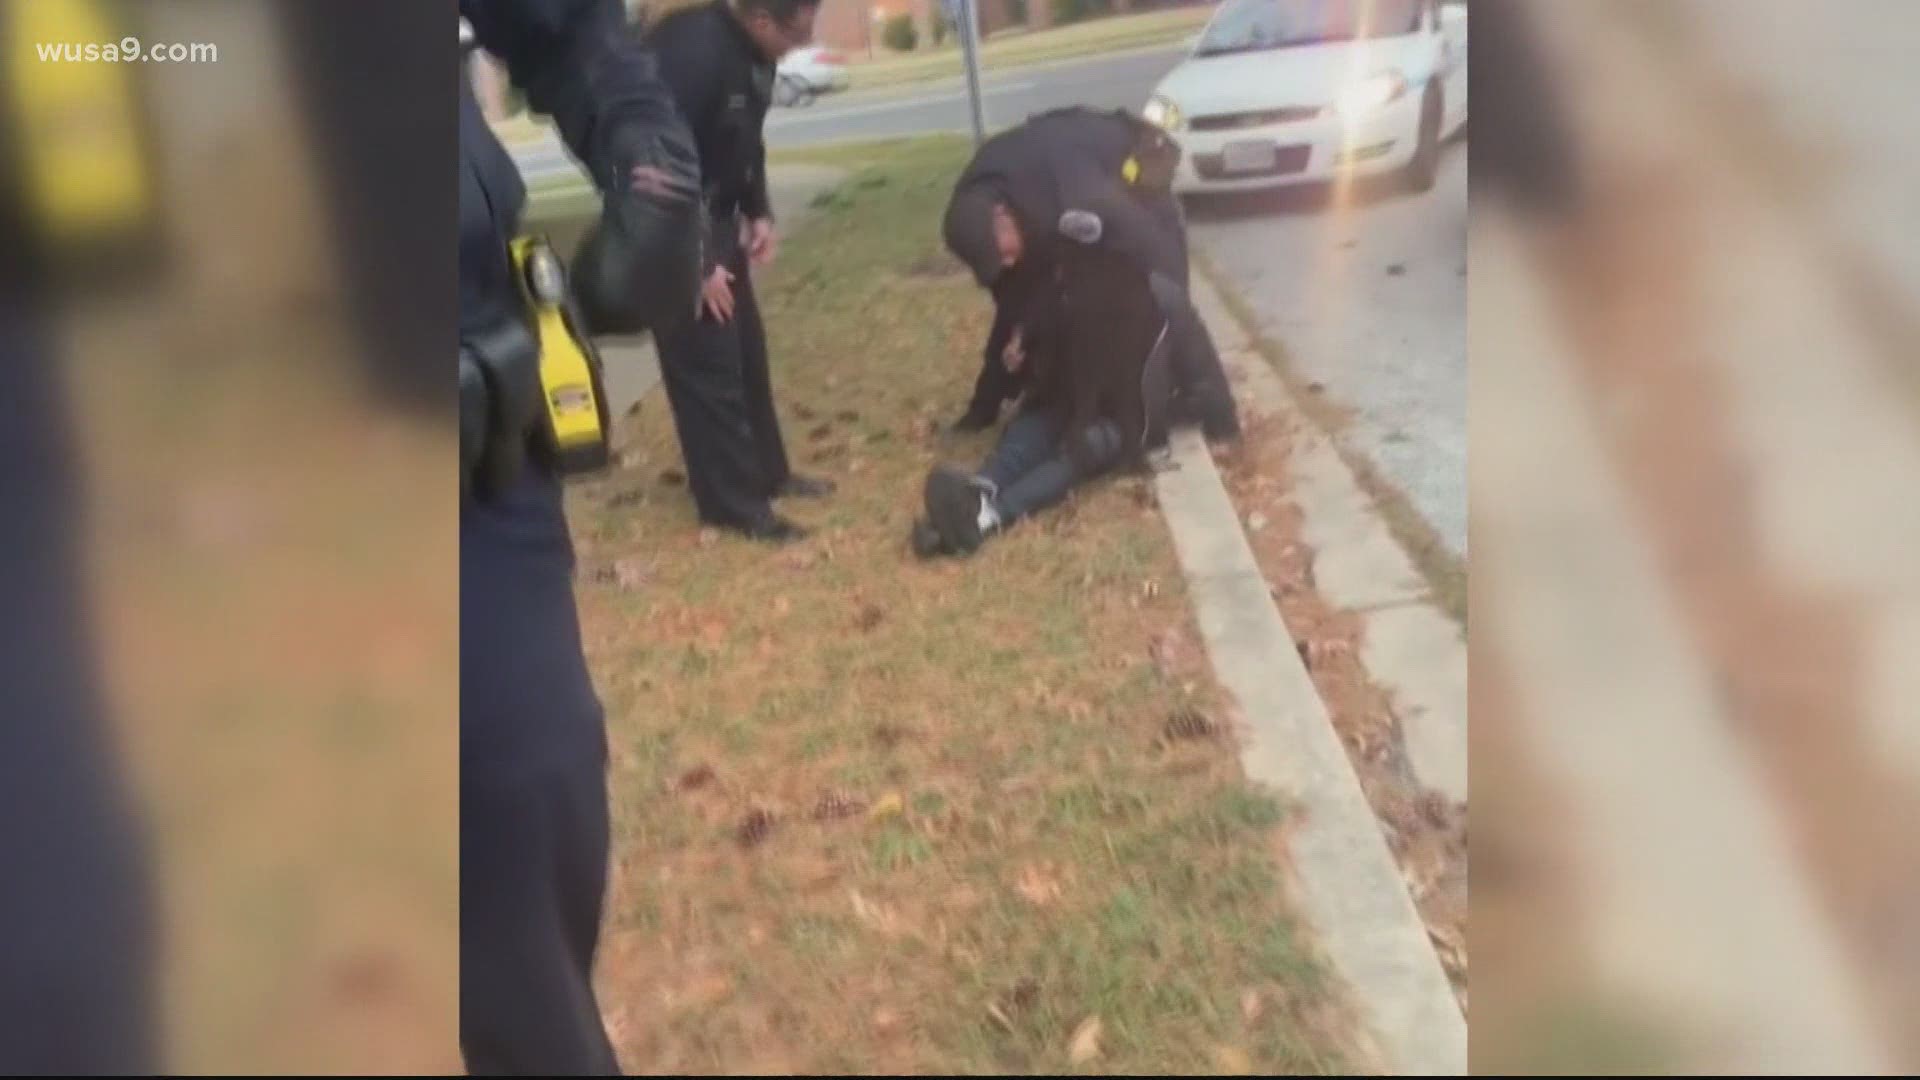 Demonte Ward-Blake is paralyzed after a police officer handcuffed him and then slammed his body to the ground.